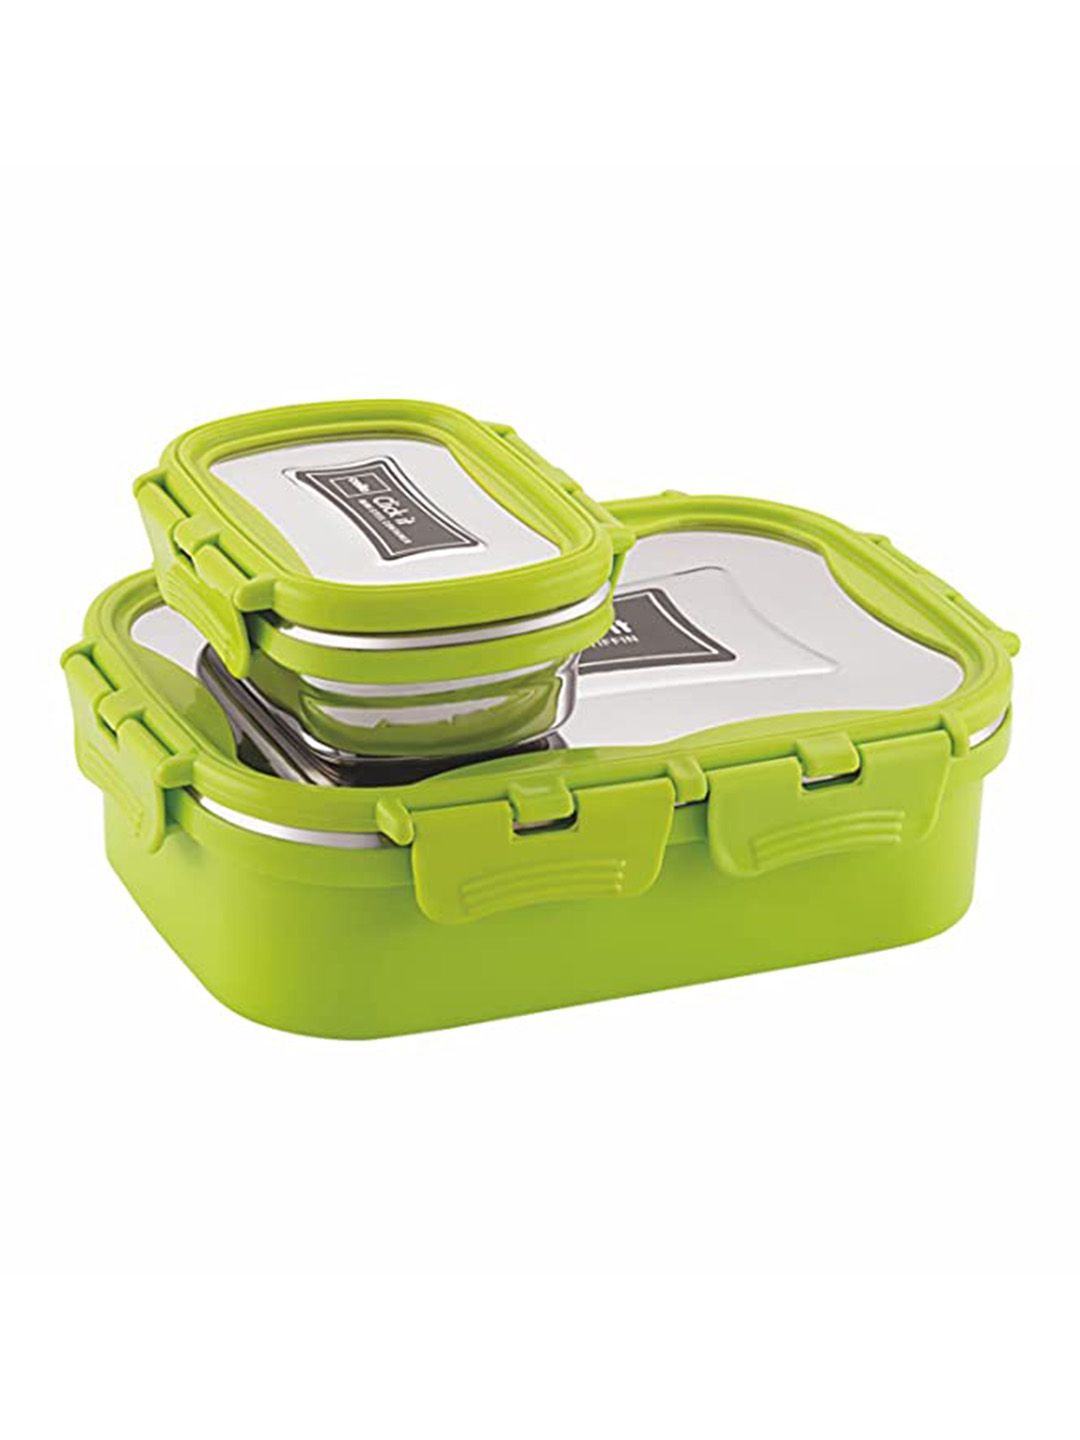 Cello Unisex Green Solid Stainless Steel Lunch Box Kitchen Storage Price in India